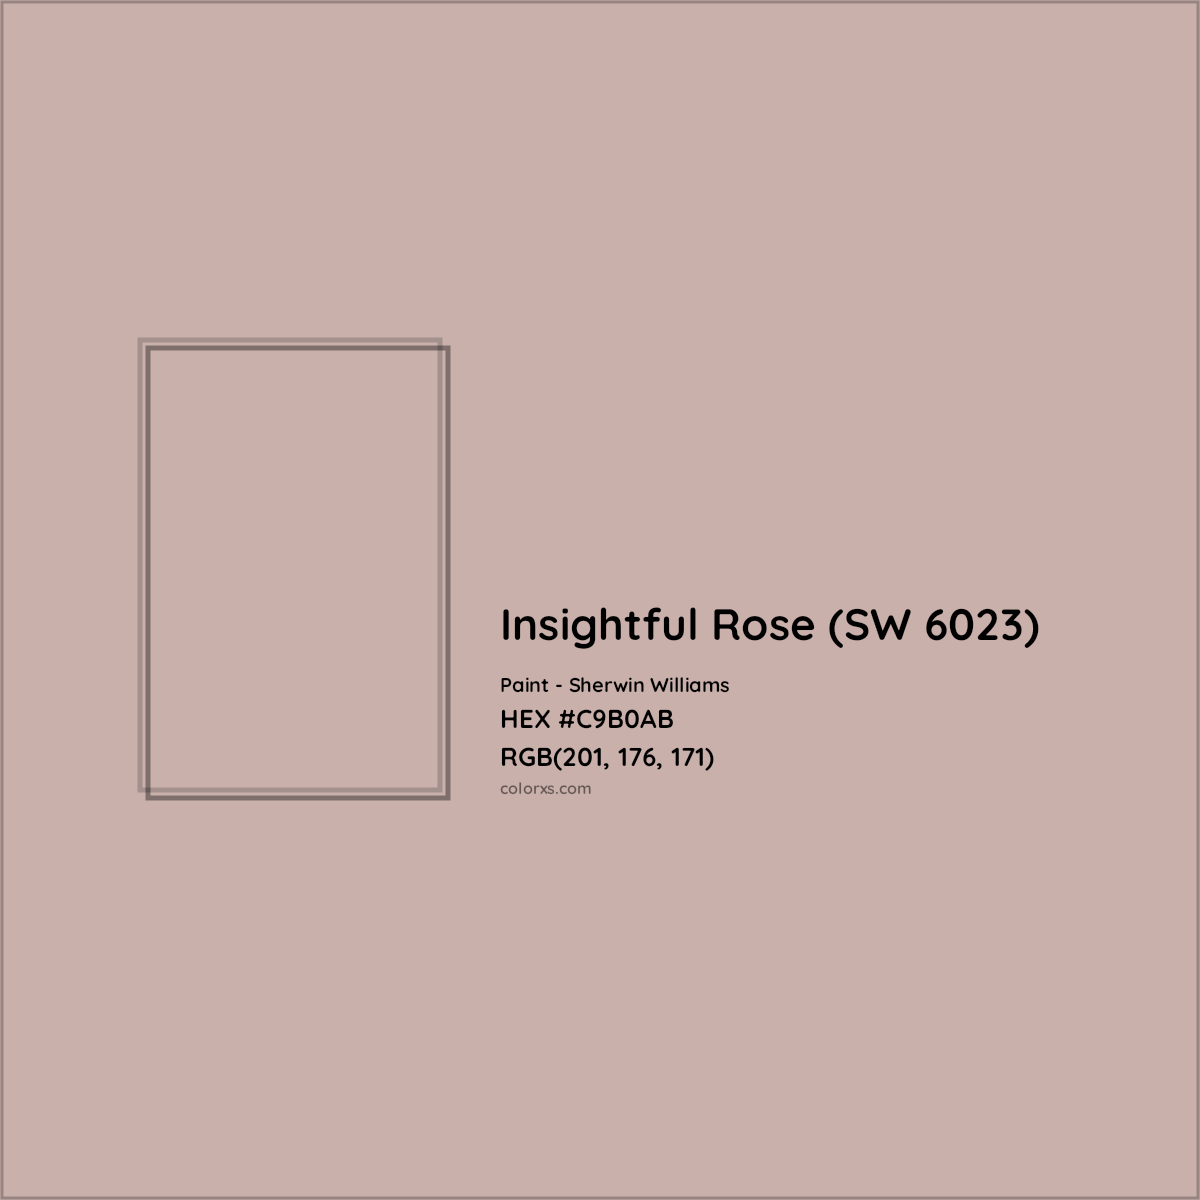 HEX #C9B0AB Insightful Rose (SW 6023) Paint Sherwin Williams - Color Code